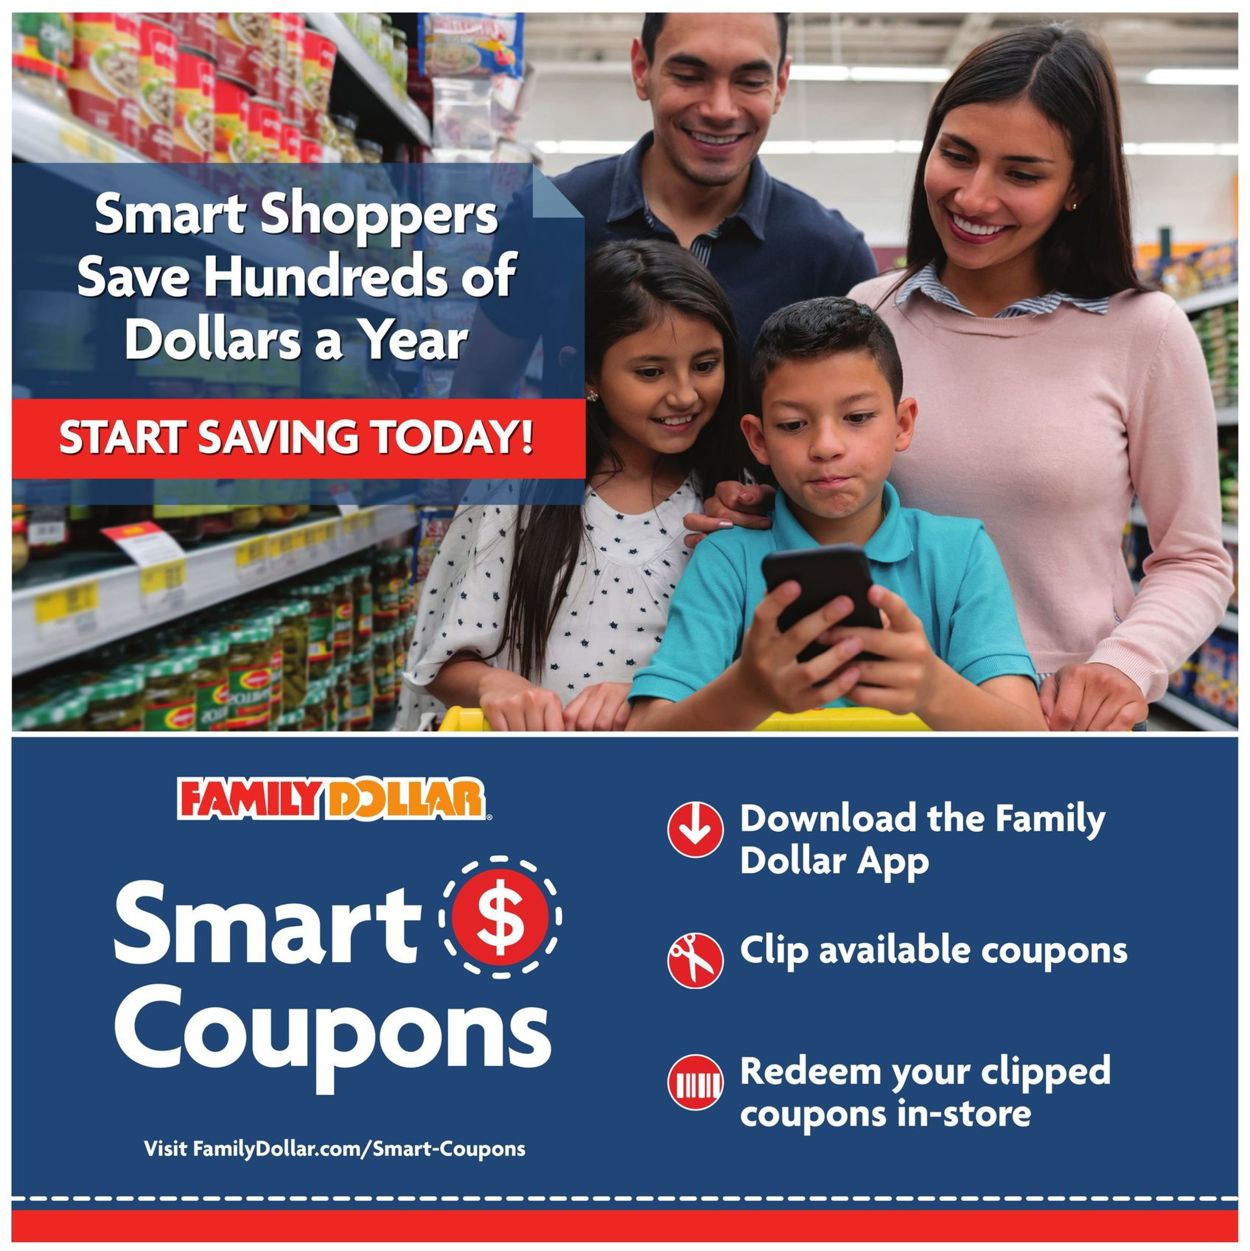 Family Dollar Ad from 04/15/2021